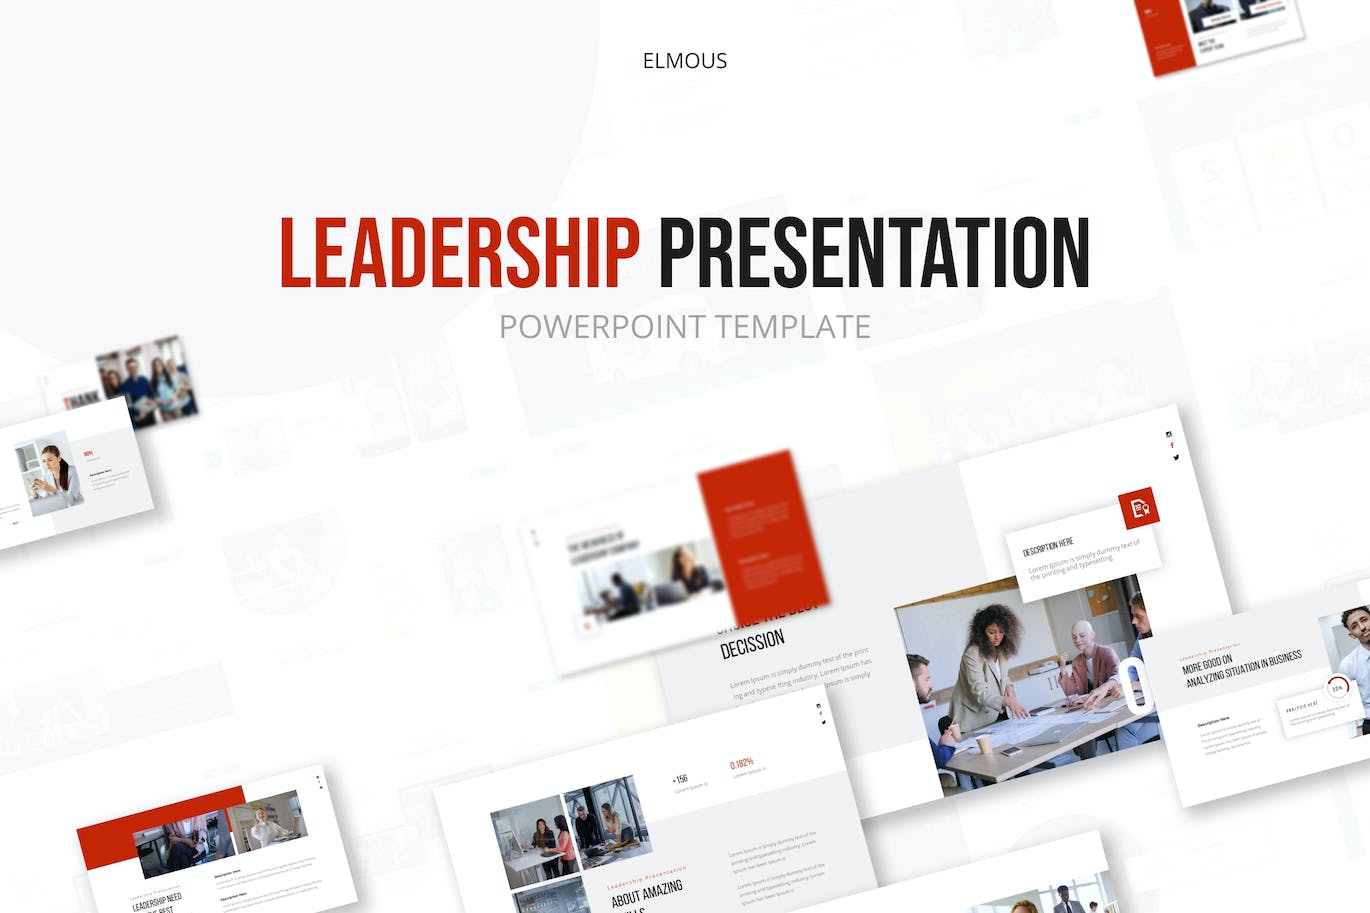 A set of images of beautiful presentation template slides on the topic of leadership.